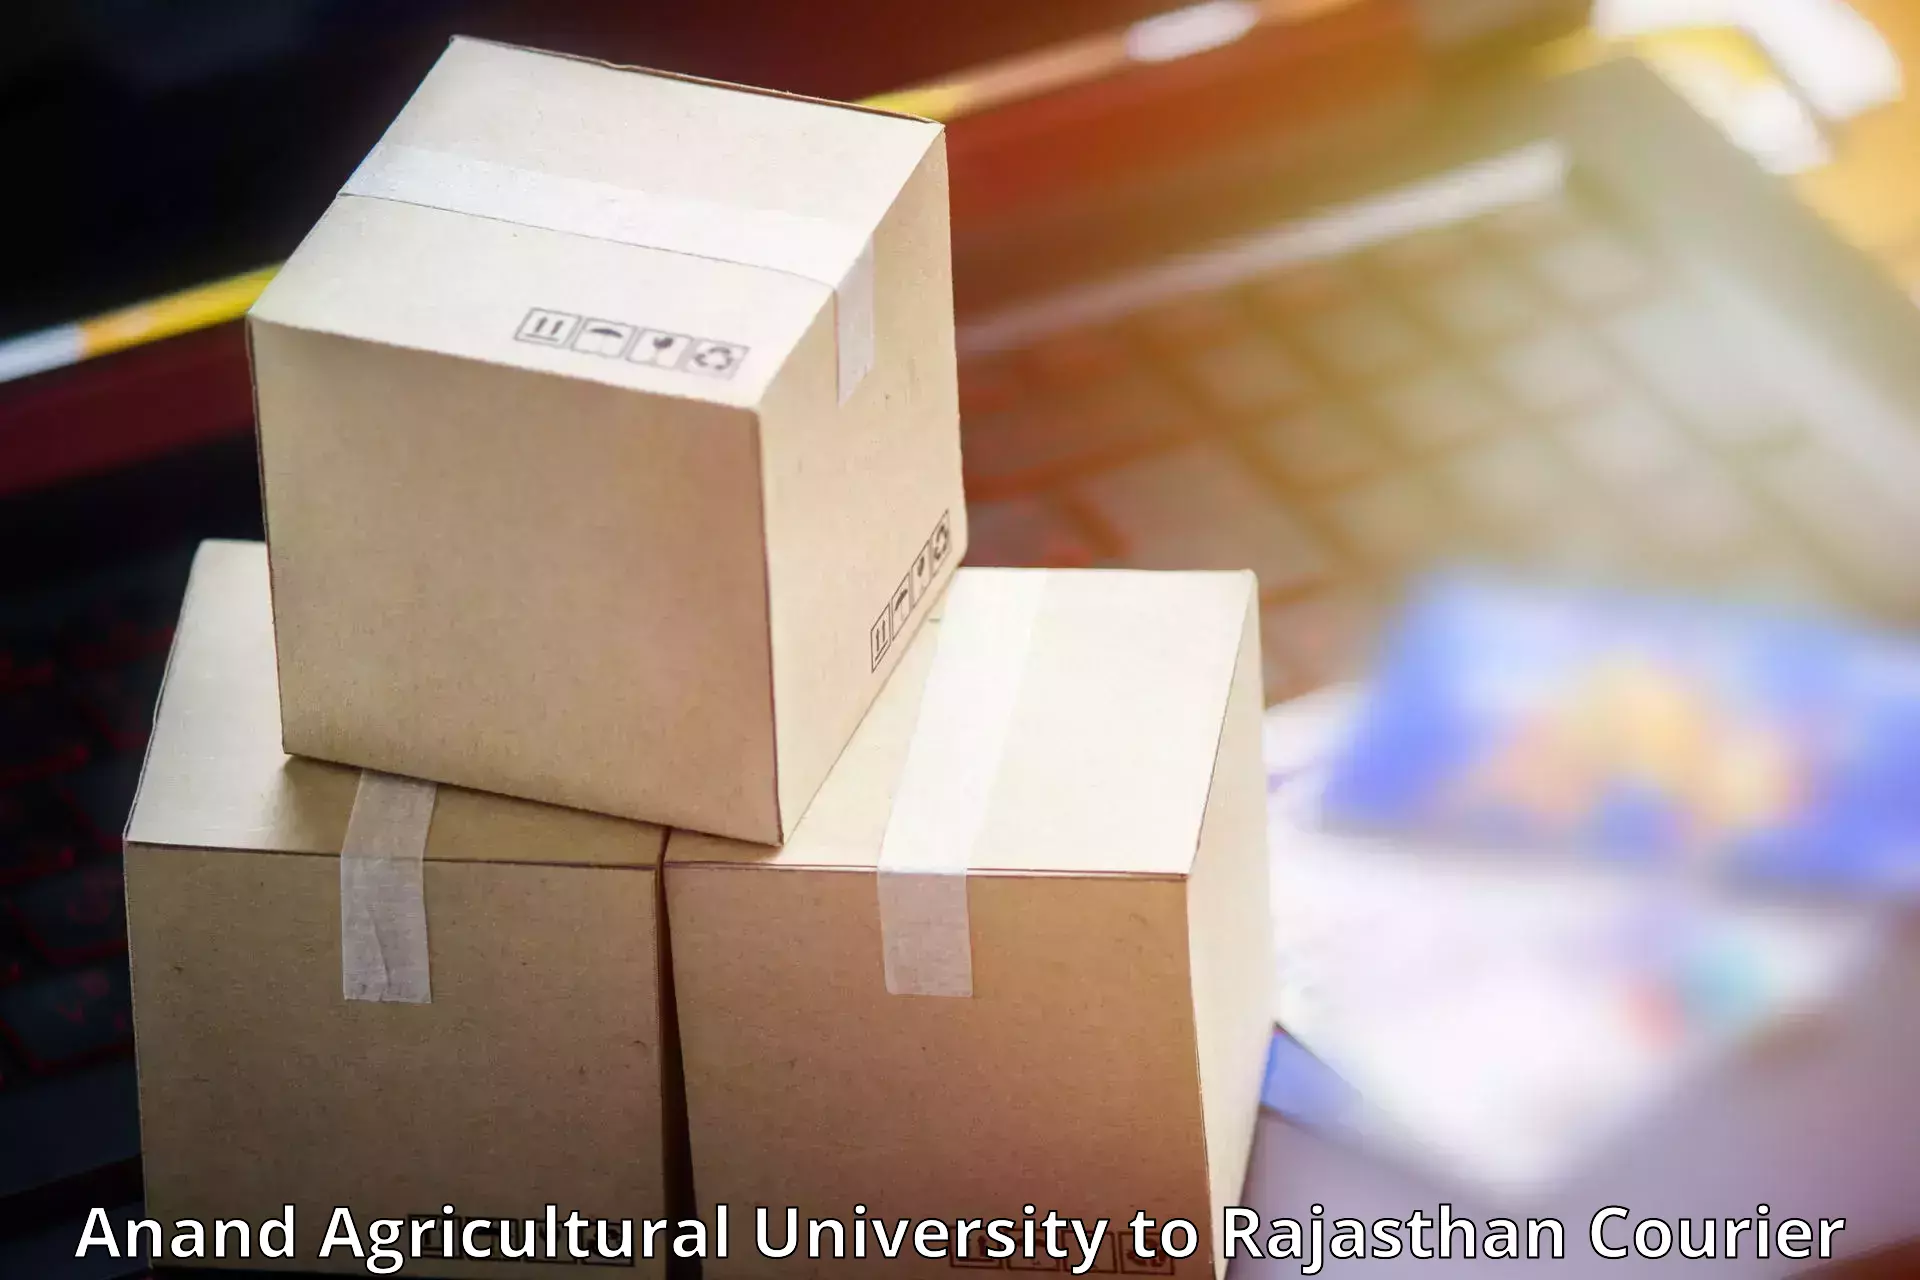 High value parcel delivery Anand Agricultural University to Karauli